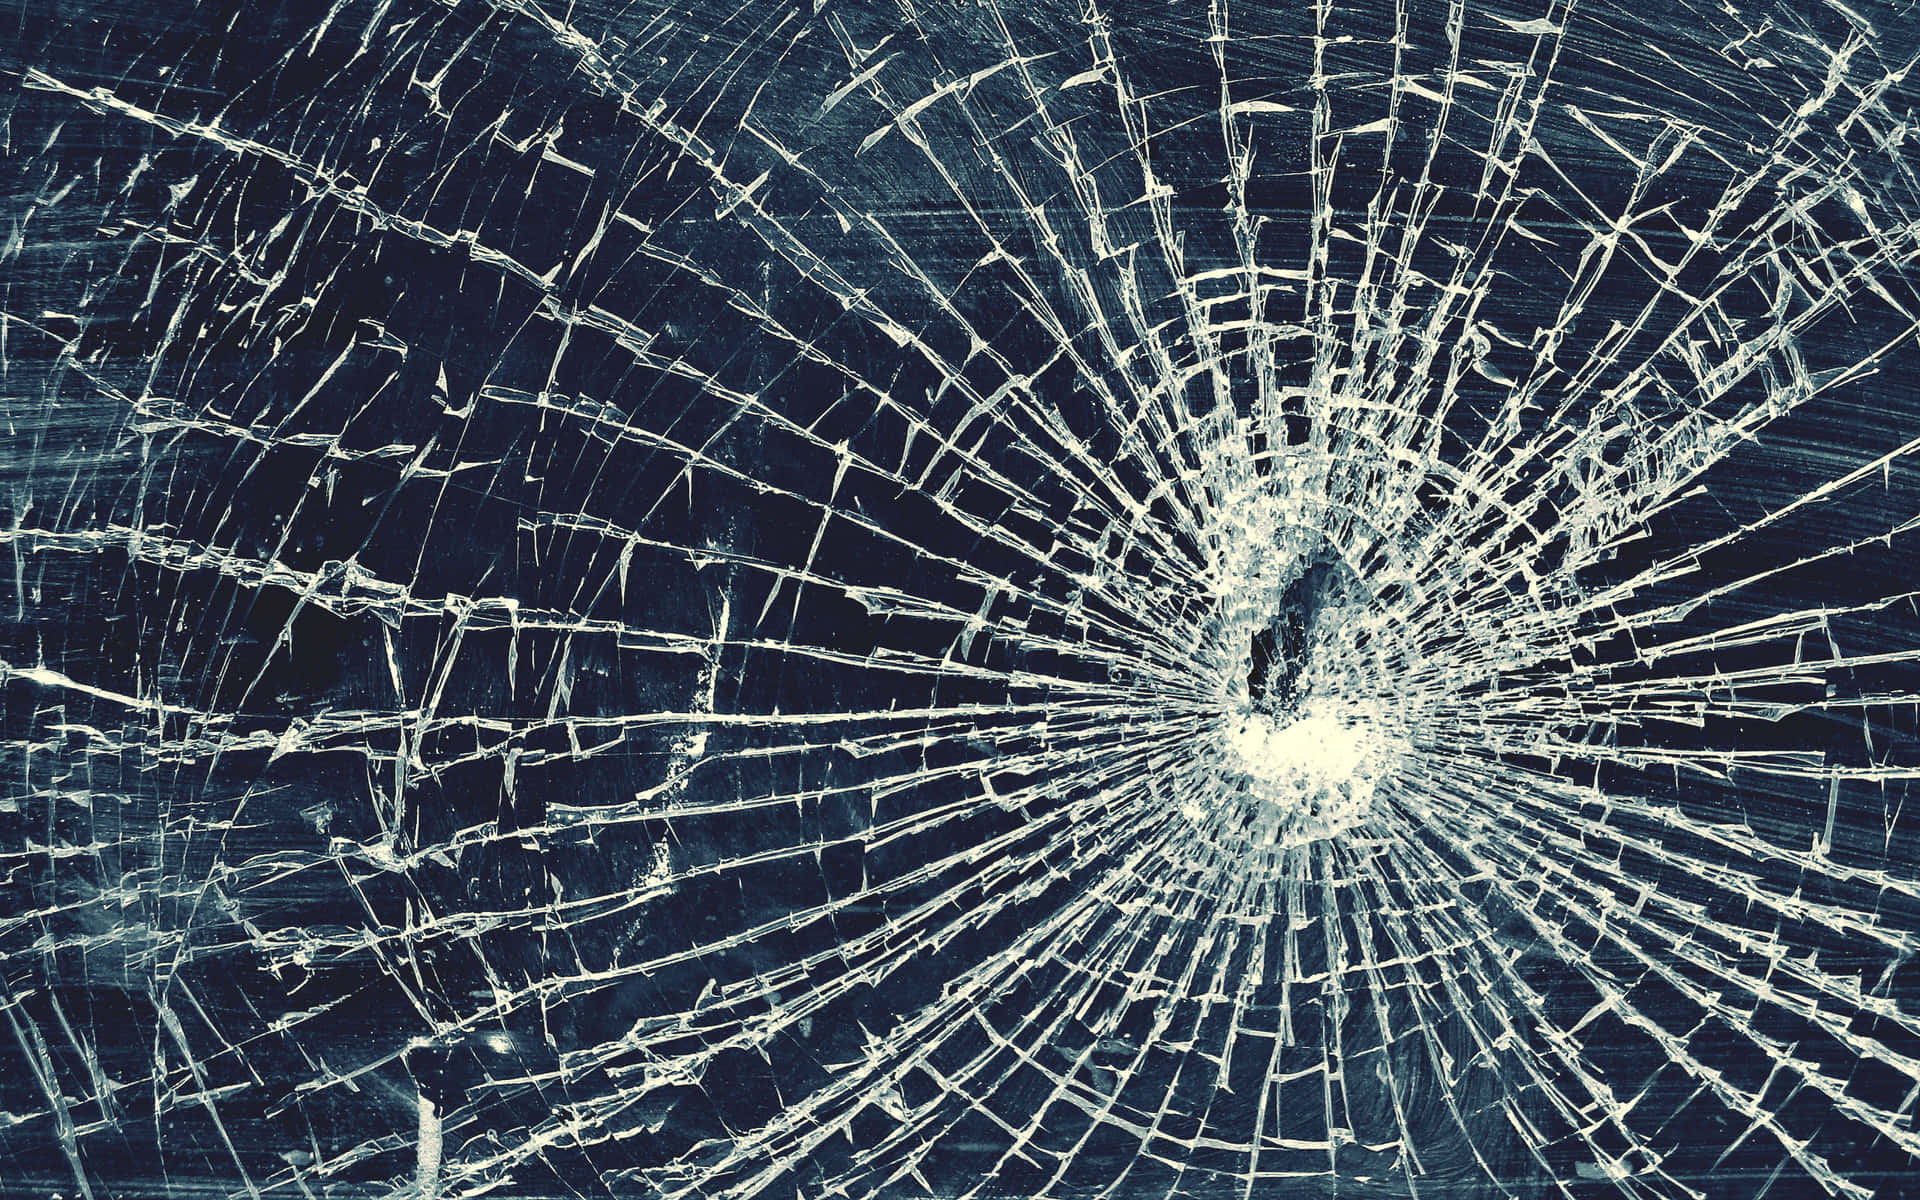 Shattered glass displaying its intricate pattern against a dark backdrop